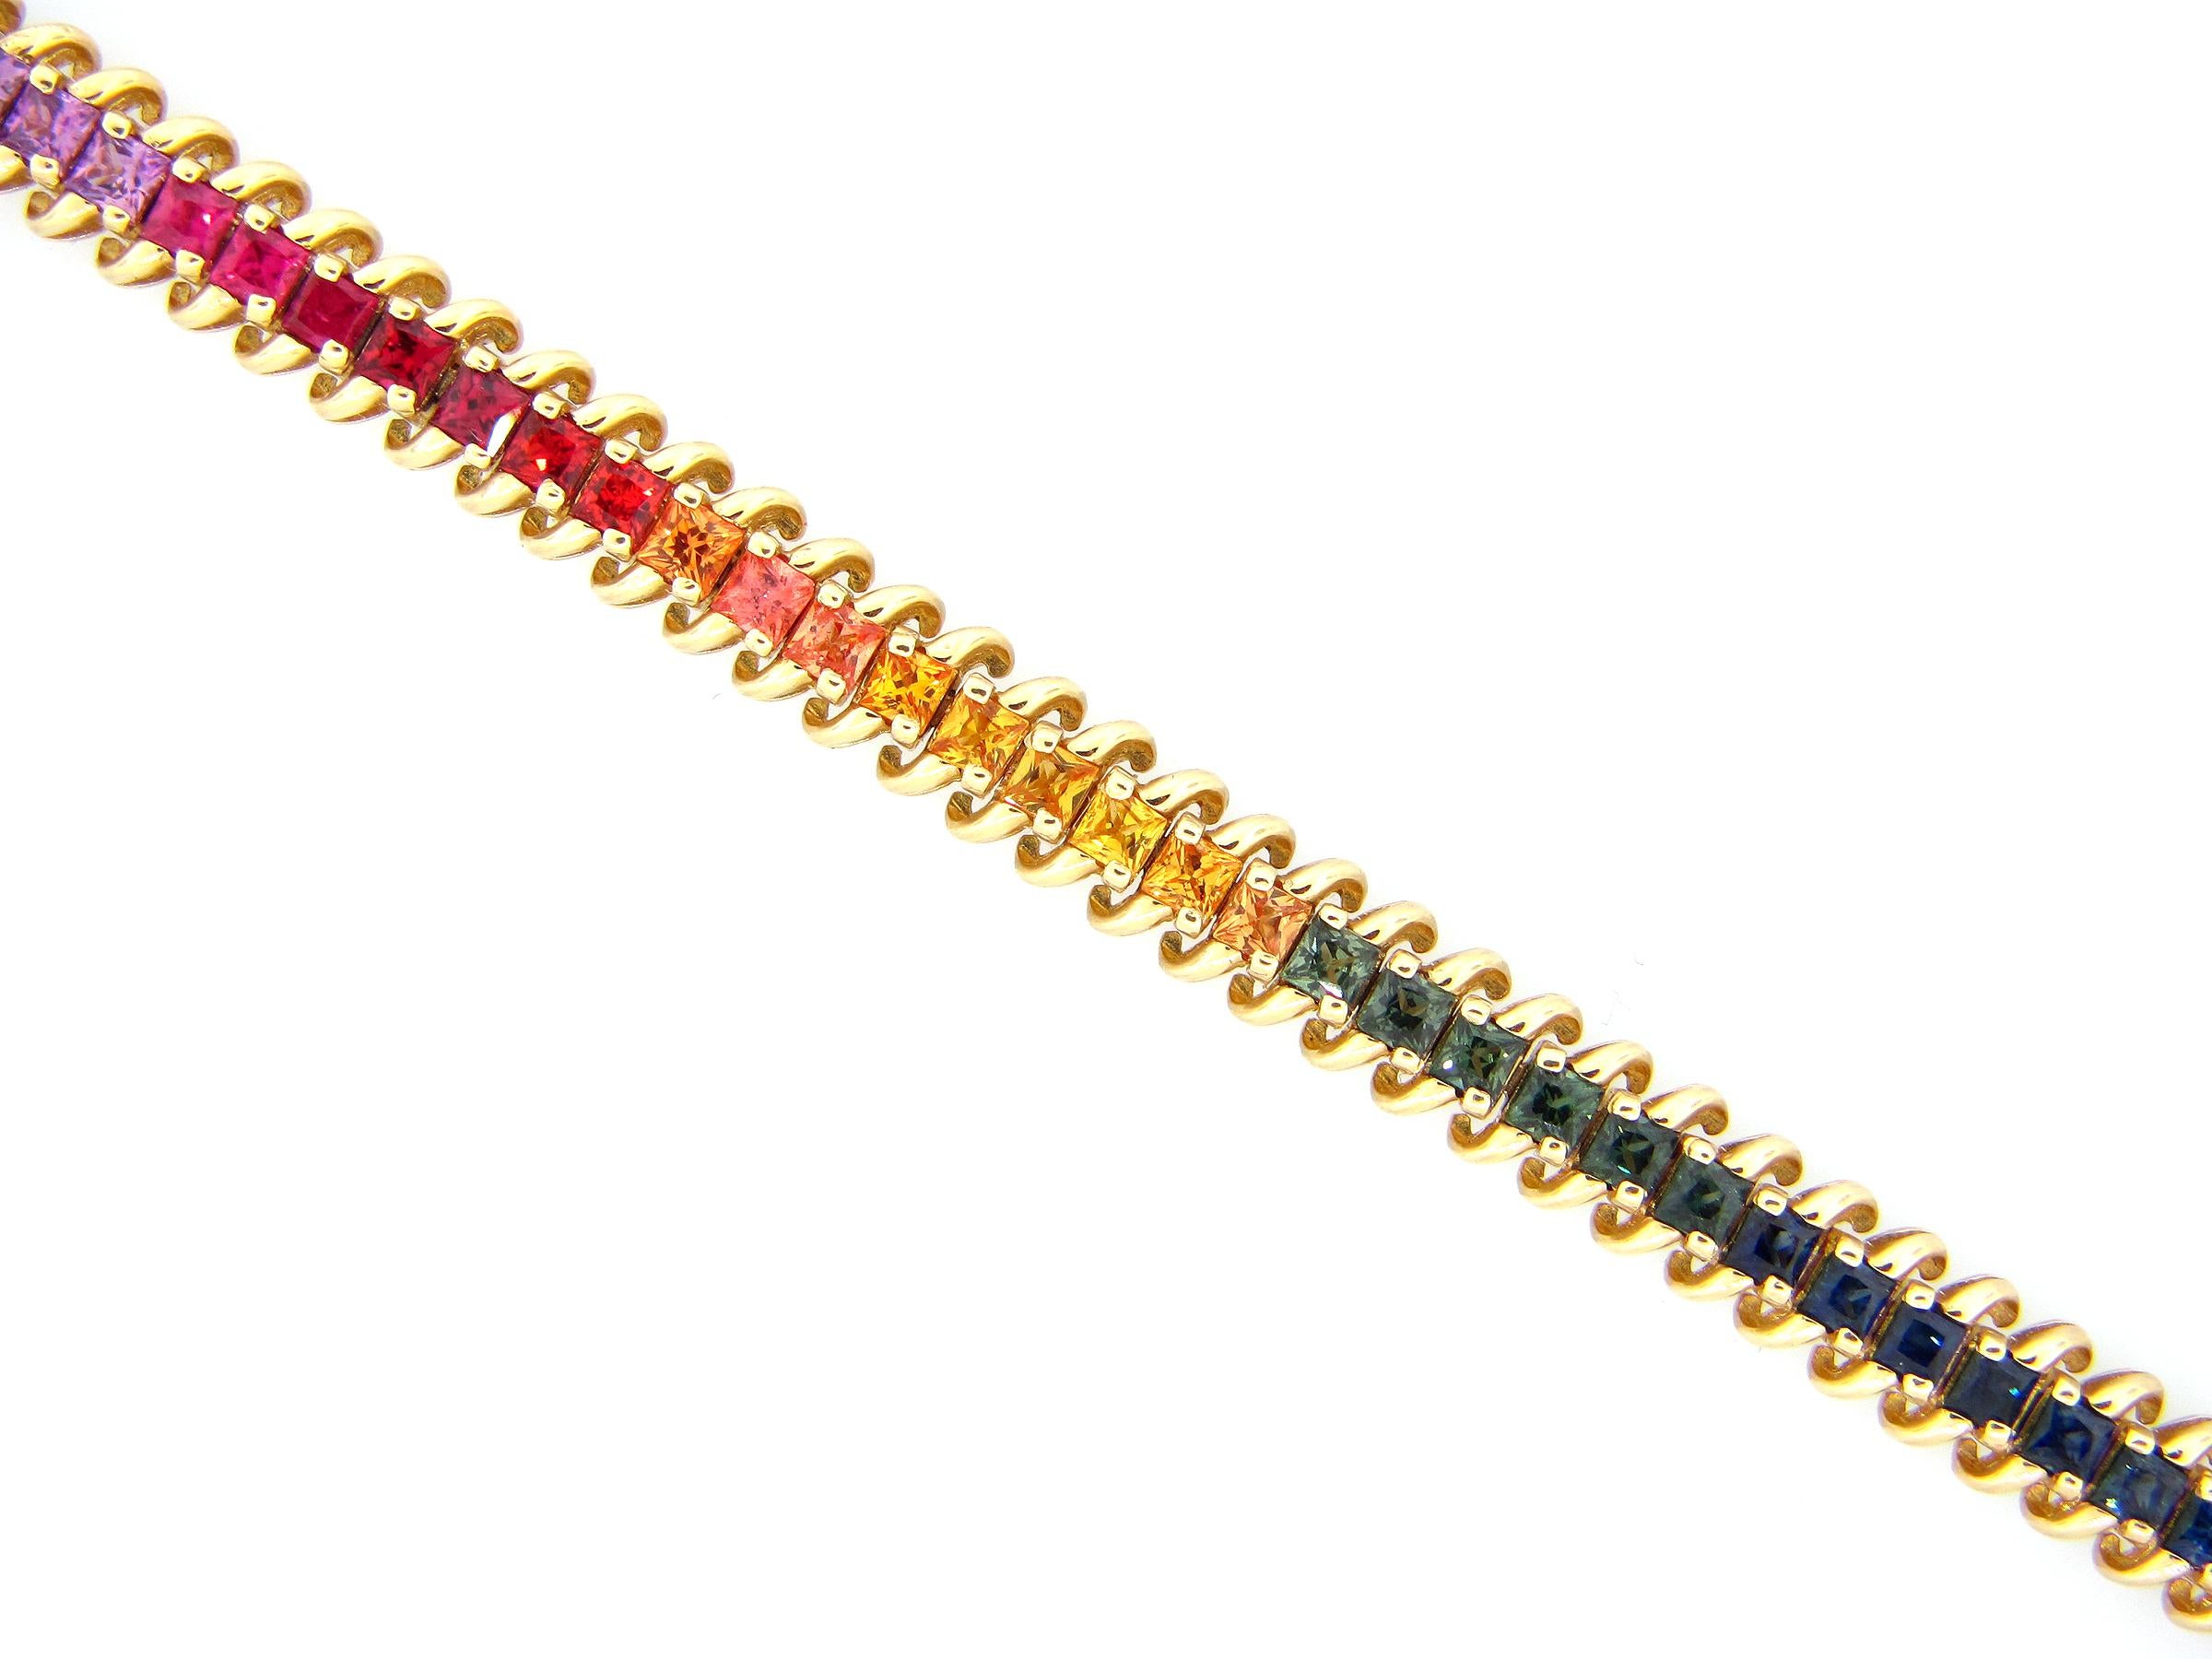 This stunning Rainbow Sapphire Bracelet features the full spectrum of Princess Cut Rainbow Sapphires 
This Bracelet is set in 14K Yellow Gold —  is 7 inches in length and is secured with a box clasp.
Total Sapphire Weight = 7.35 Carats.
